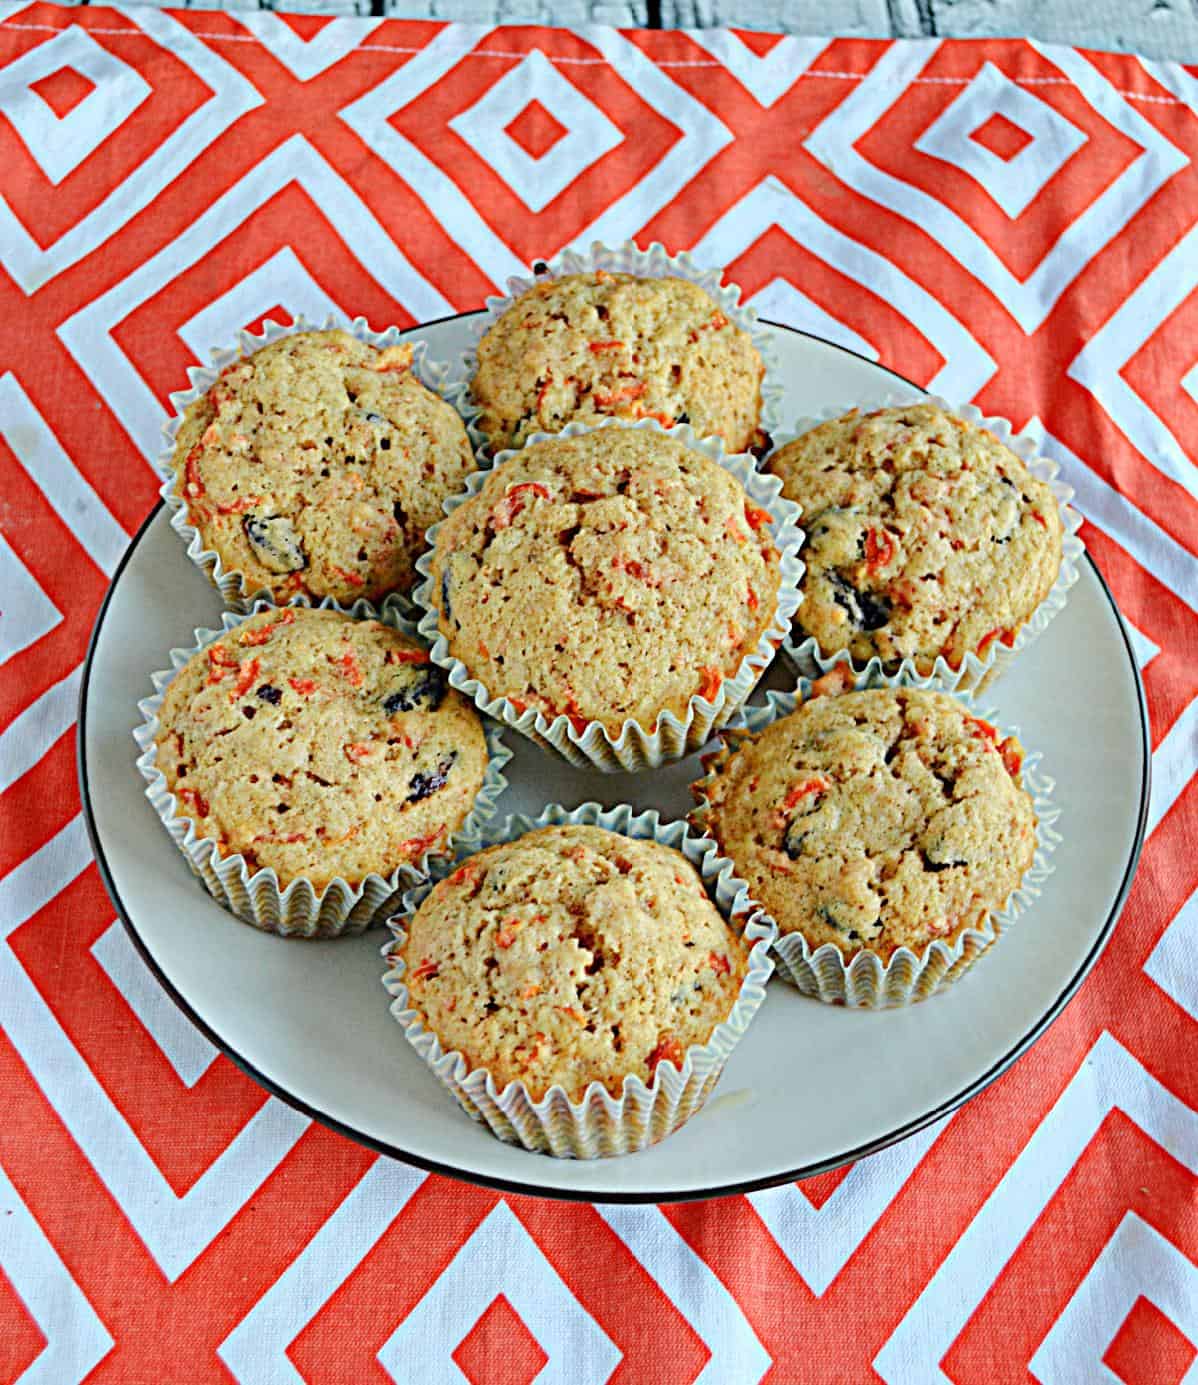  You won't believe how easy it is to make these irresistible muffins!